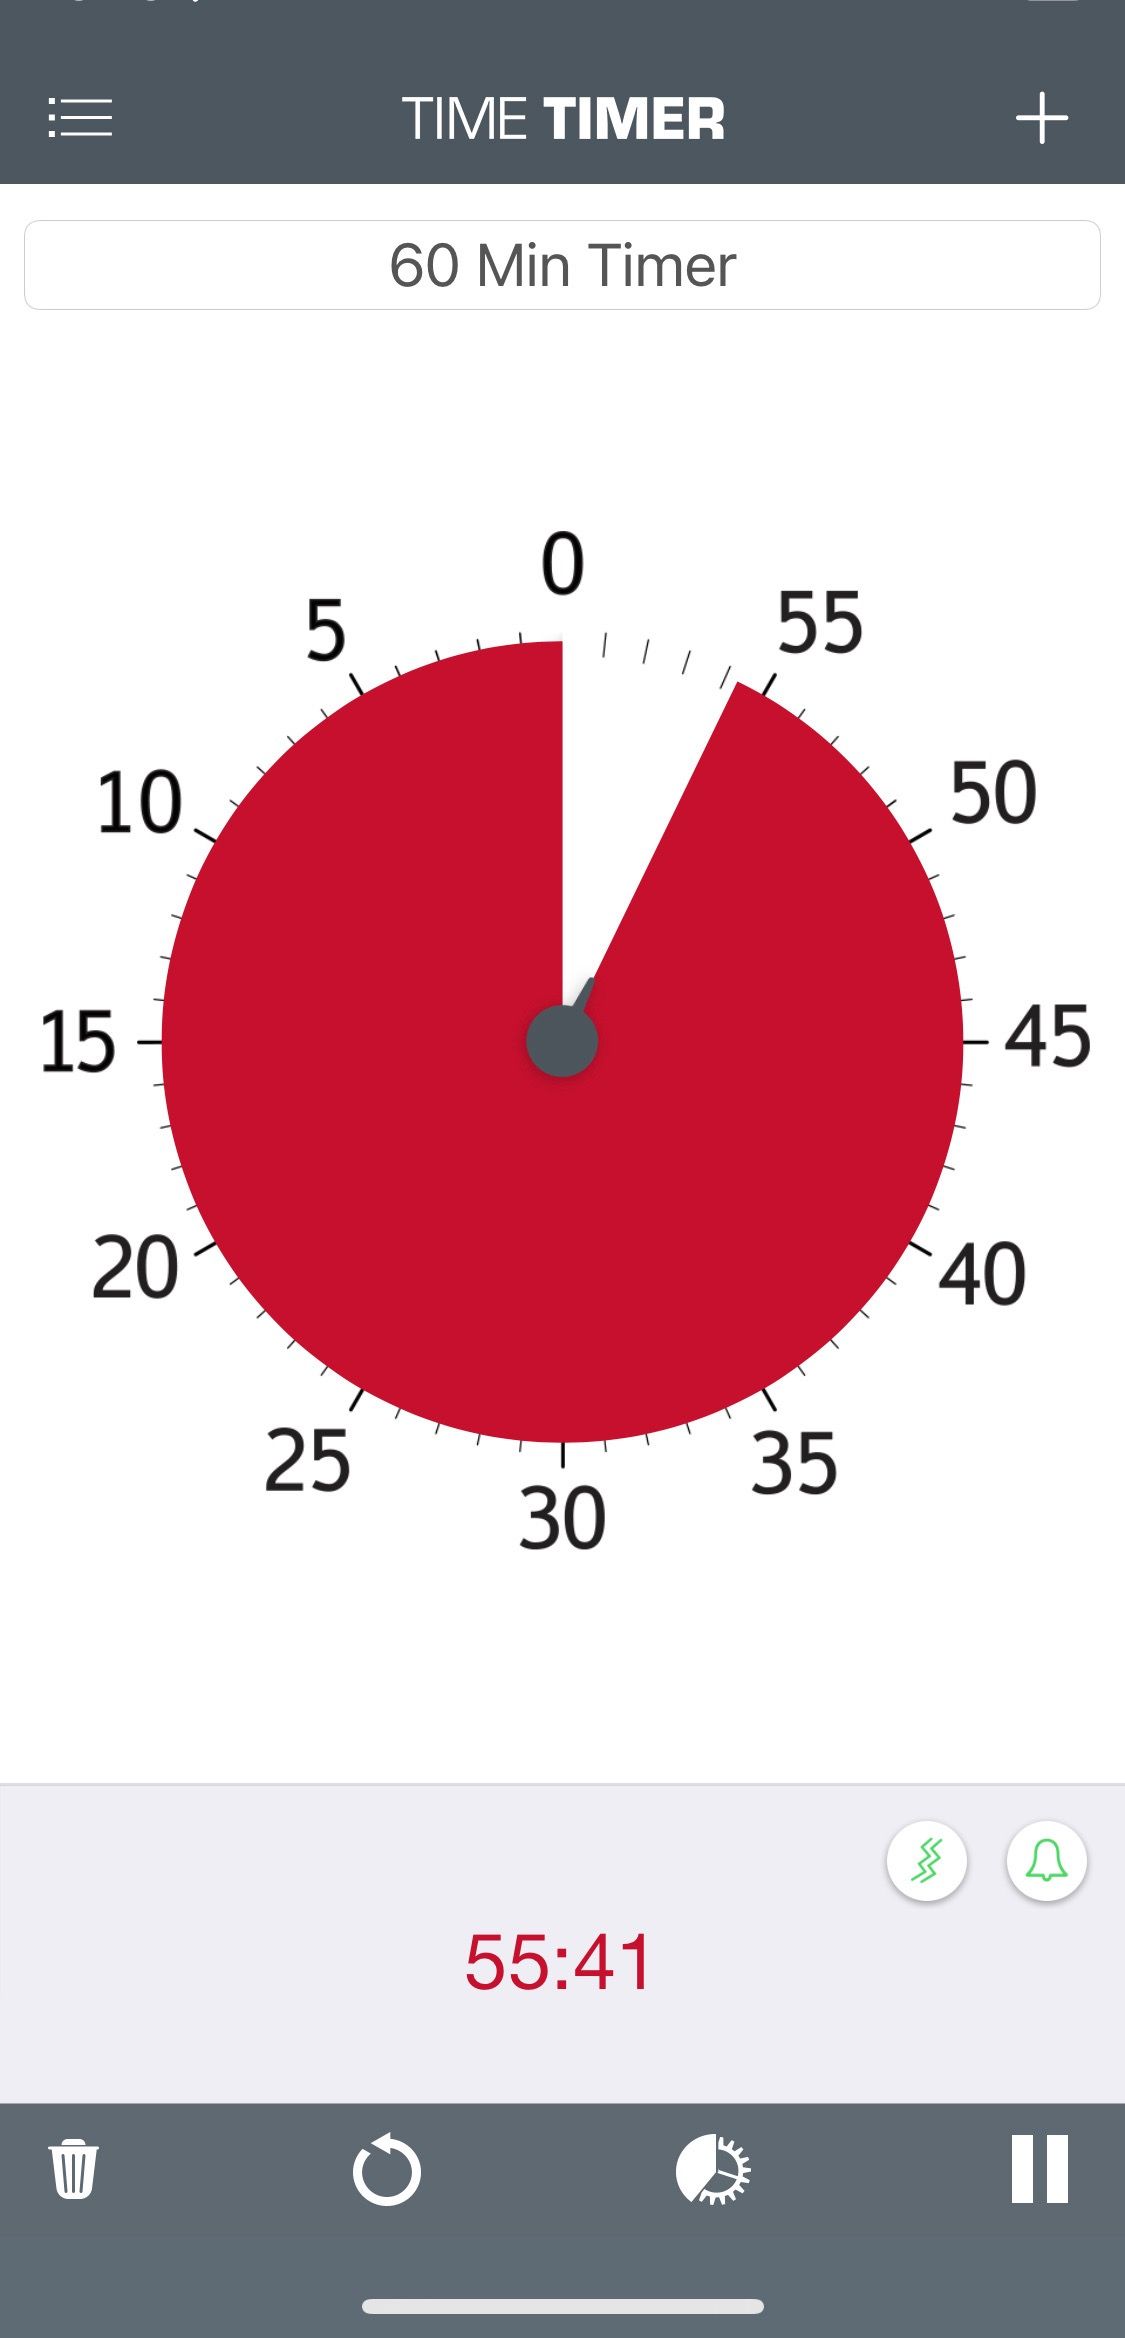 Screenshot of Time Timer app showing red disk countdown screen